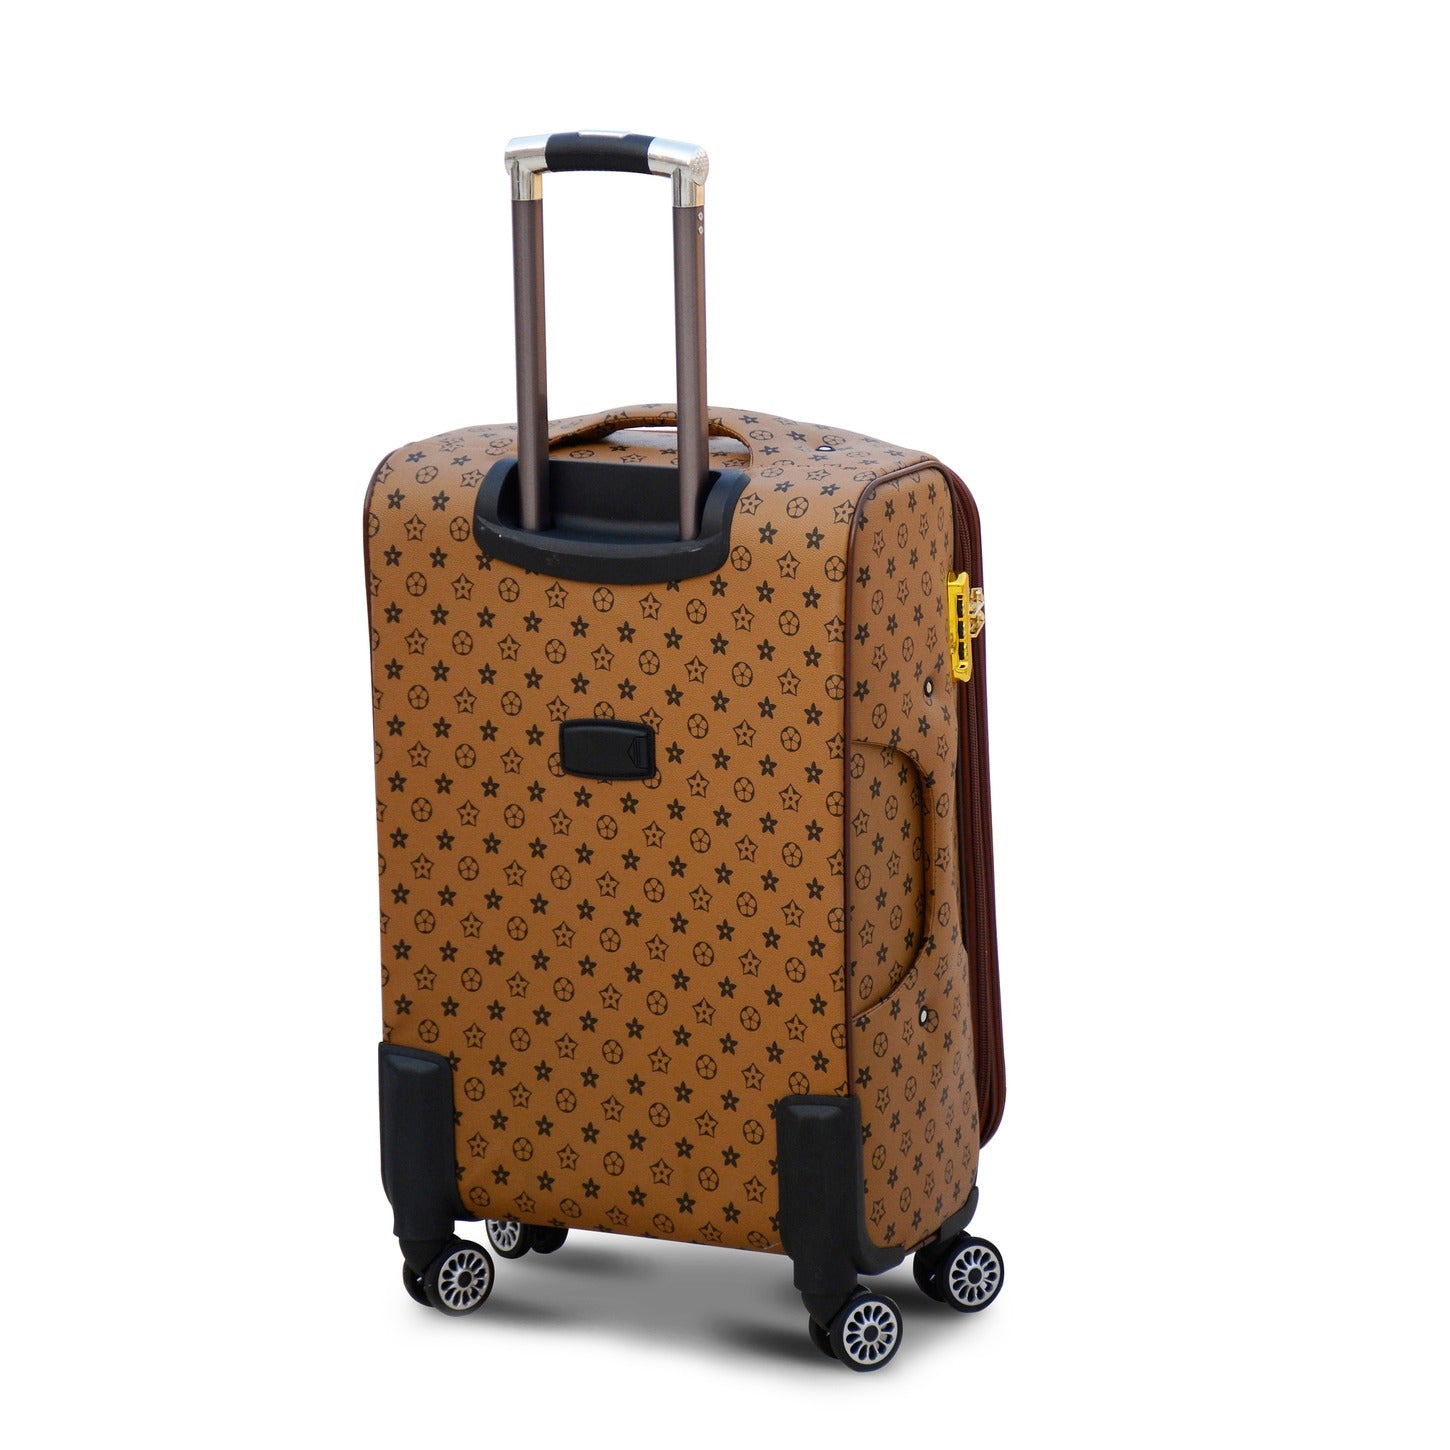 3 Piece Full Set 20" 24" 28 Inches Light Brown Colour LVR PU Leather Luggage Lightweight Soft Material Trolley Bag with Spinner wheel Zaappy.com